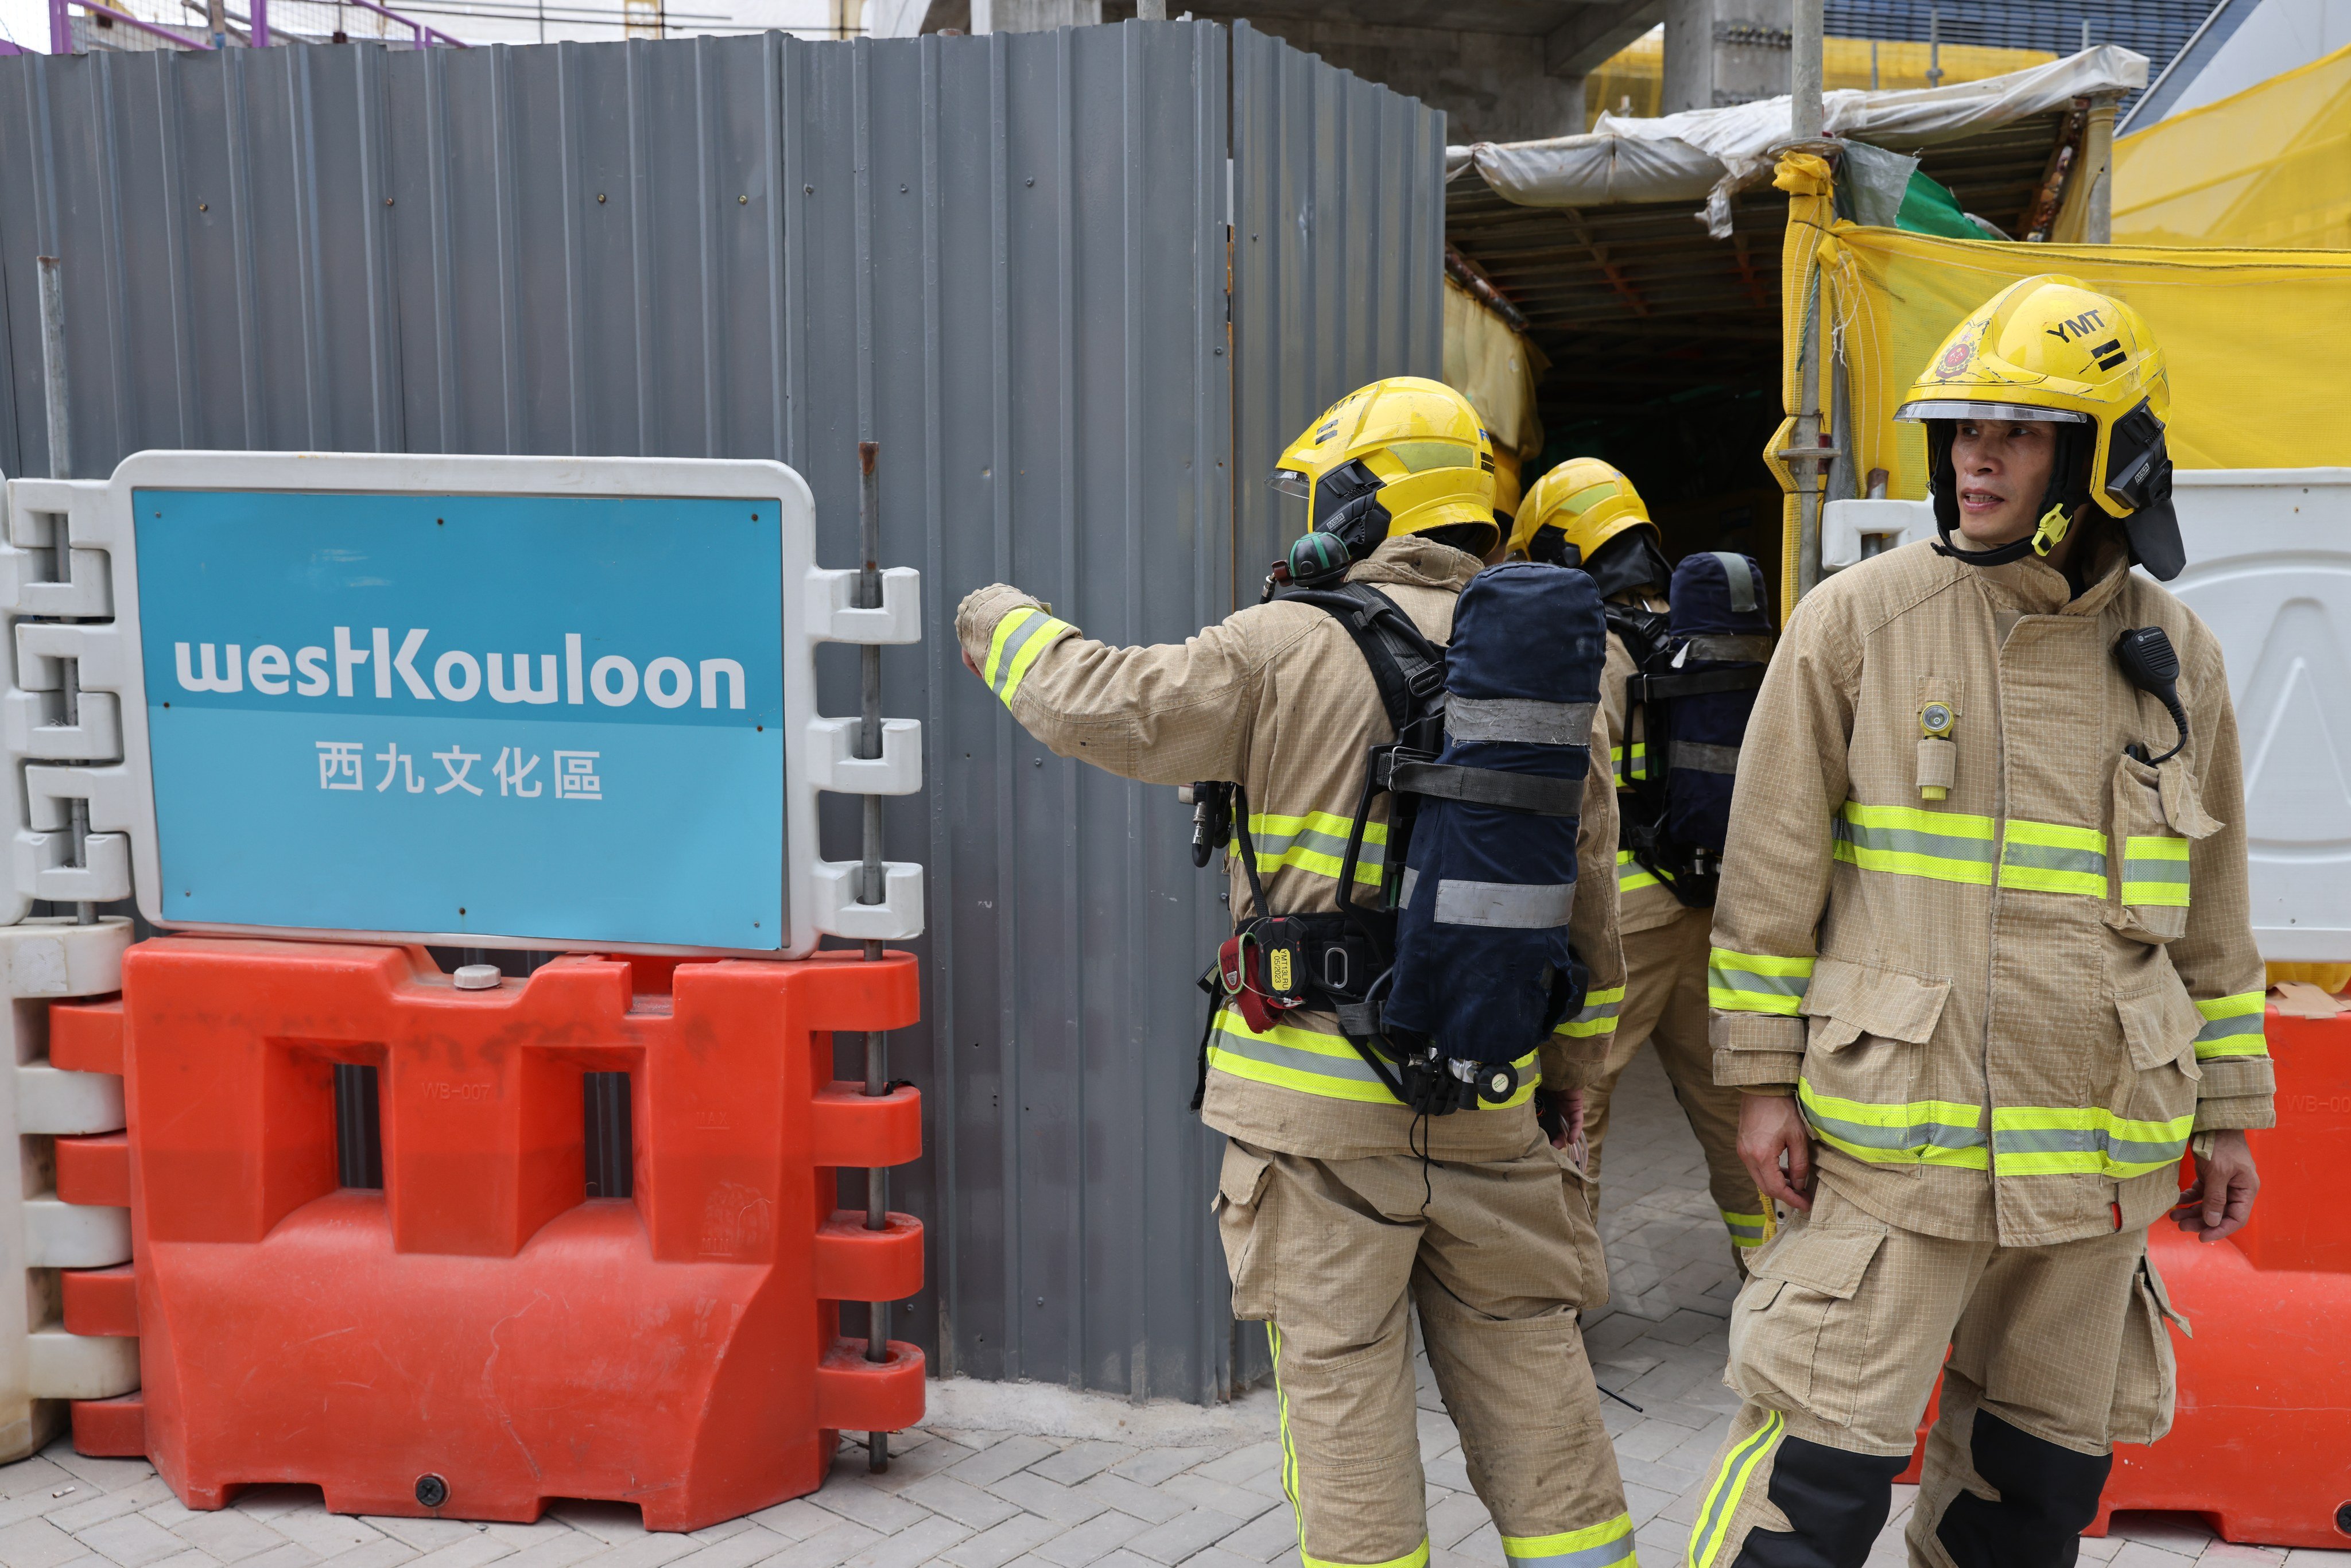 Firefighters at the Lyric Theatre construction site in West Kowloon after two workers were found dead in a gas-filled underground chamber. Photo: Yik Yeung-man